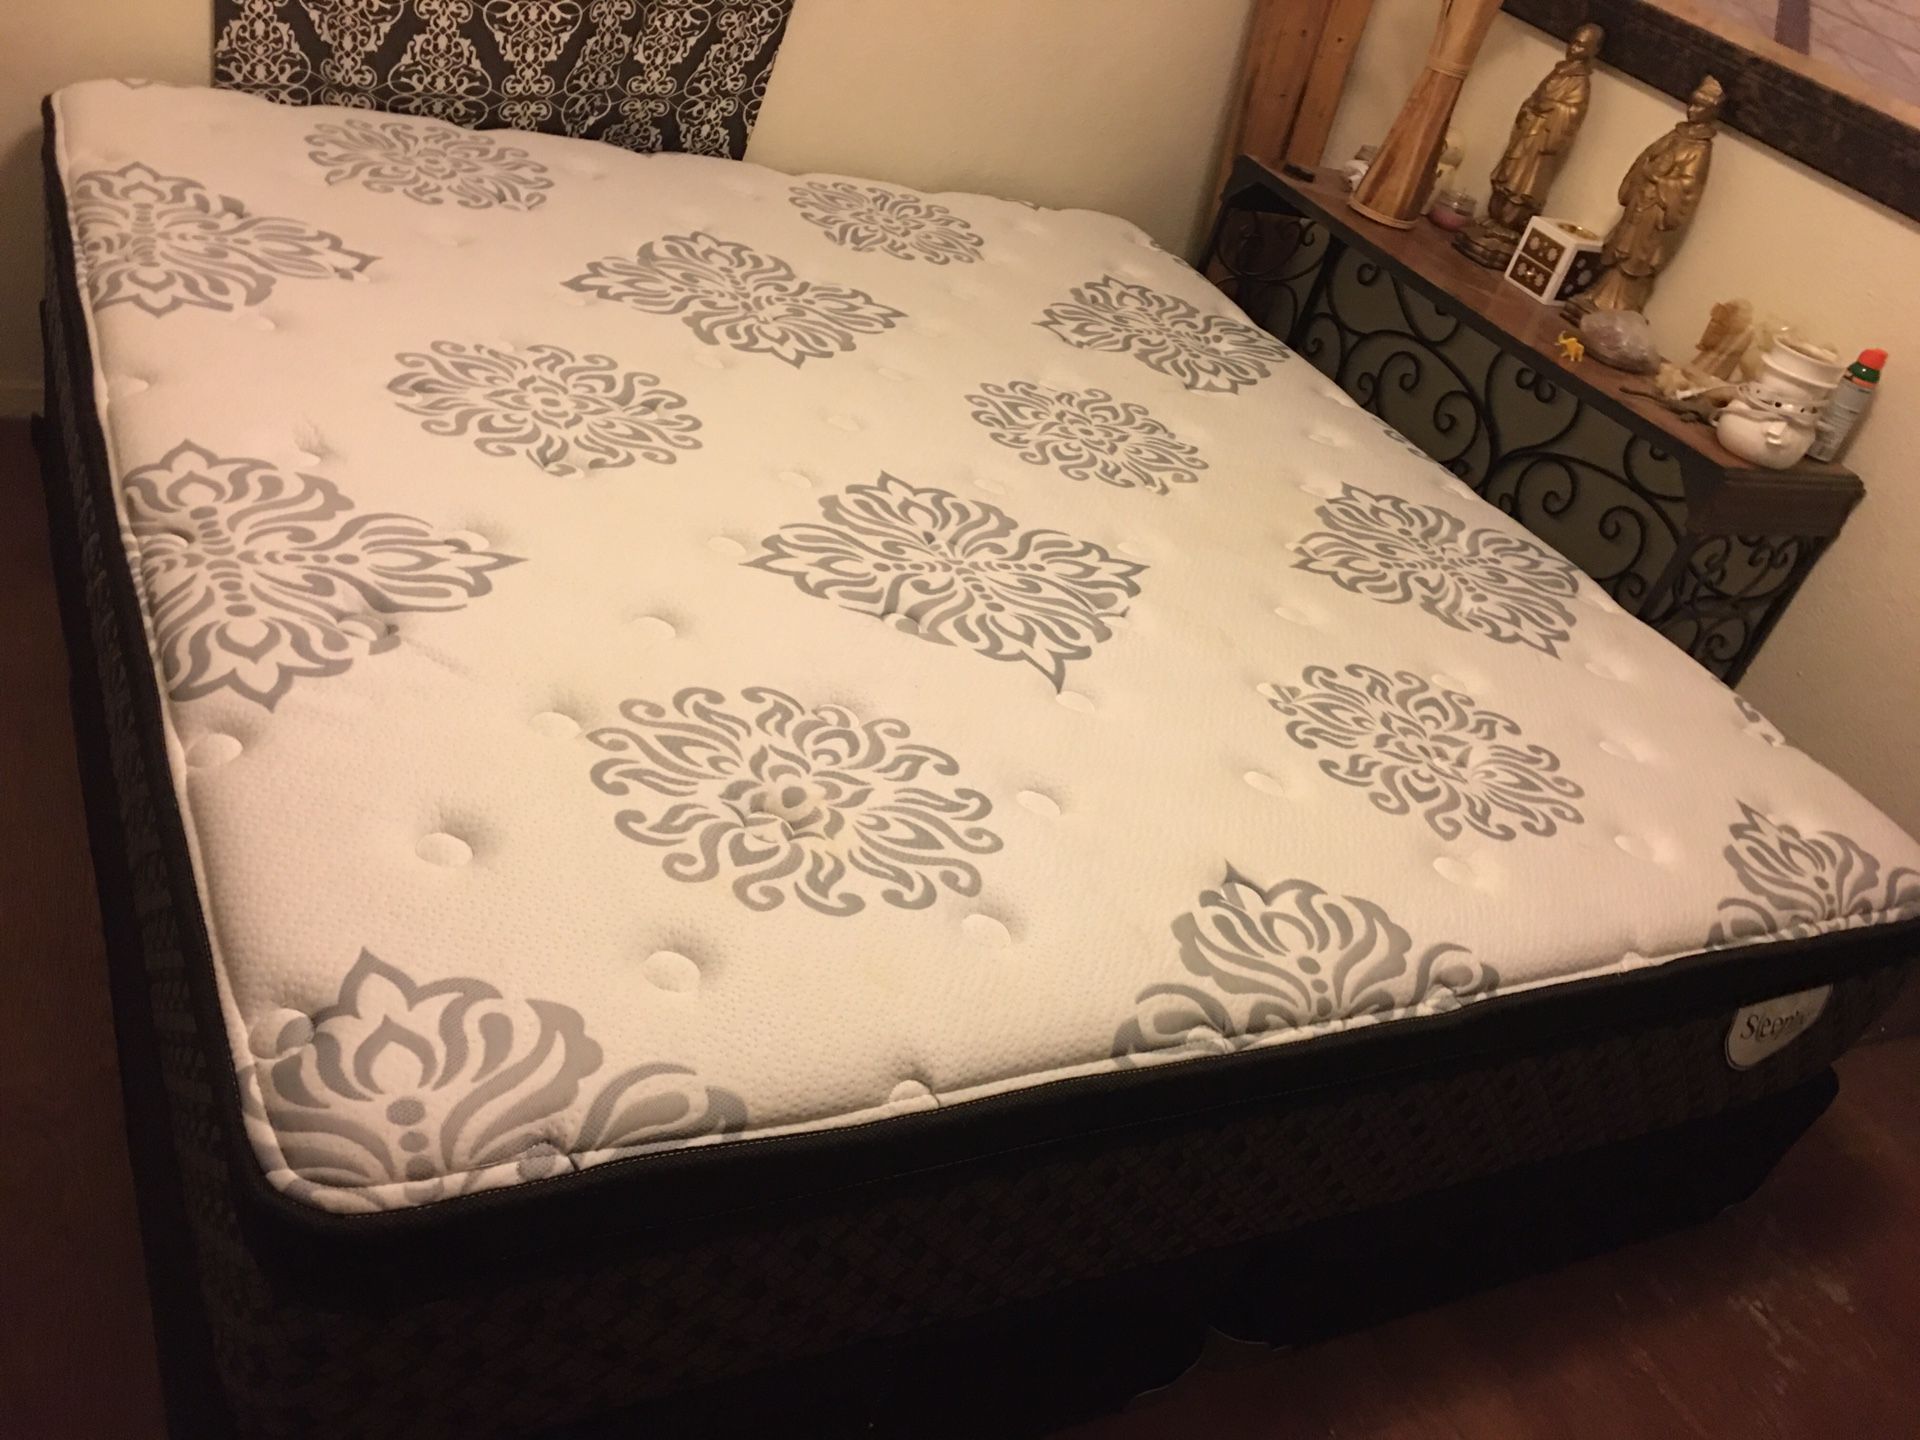 LIKE NEW SIX MONTHS OLD KING SIZE PILLOW TOP MATTRESS AND BOX SPRINGS-SEIS MESES DE USO COMO NUEVO